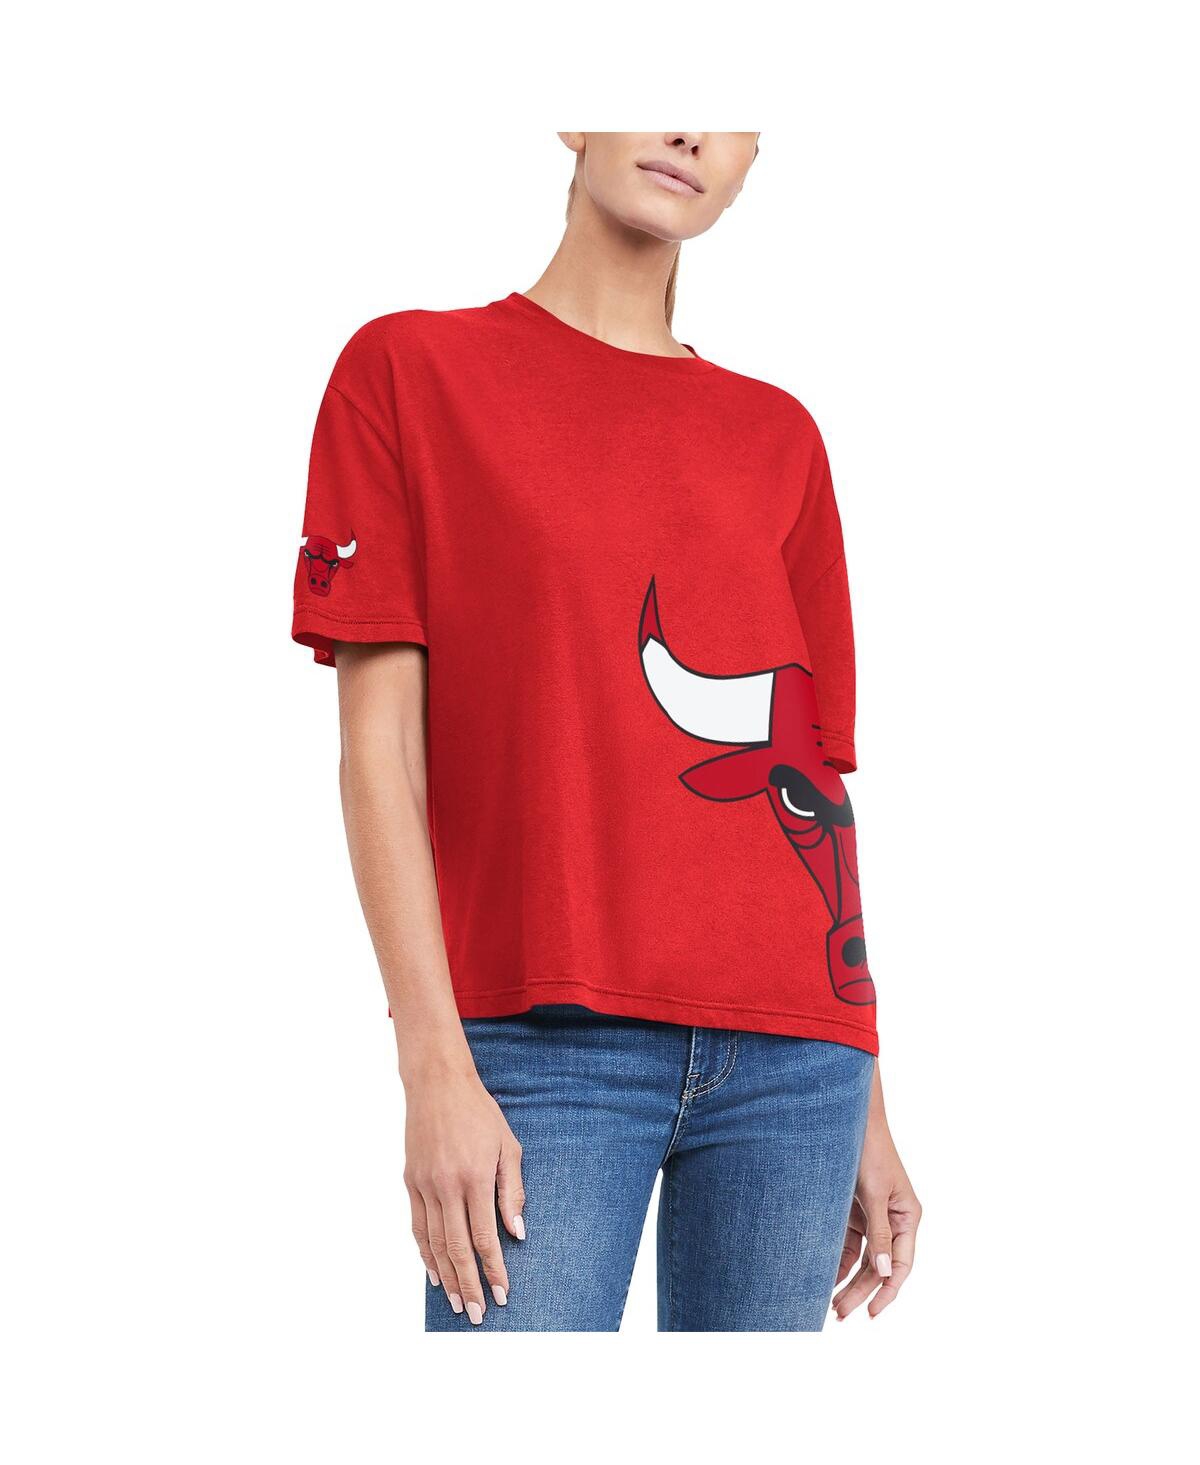 TOMMY JEANS WOMEN'S TOMMY JEANS RED CHICAGO BULLS BIANCA T-SHIRT